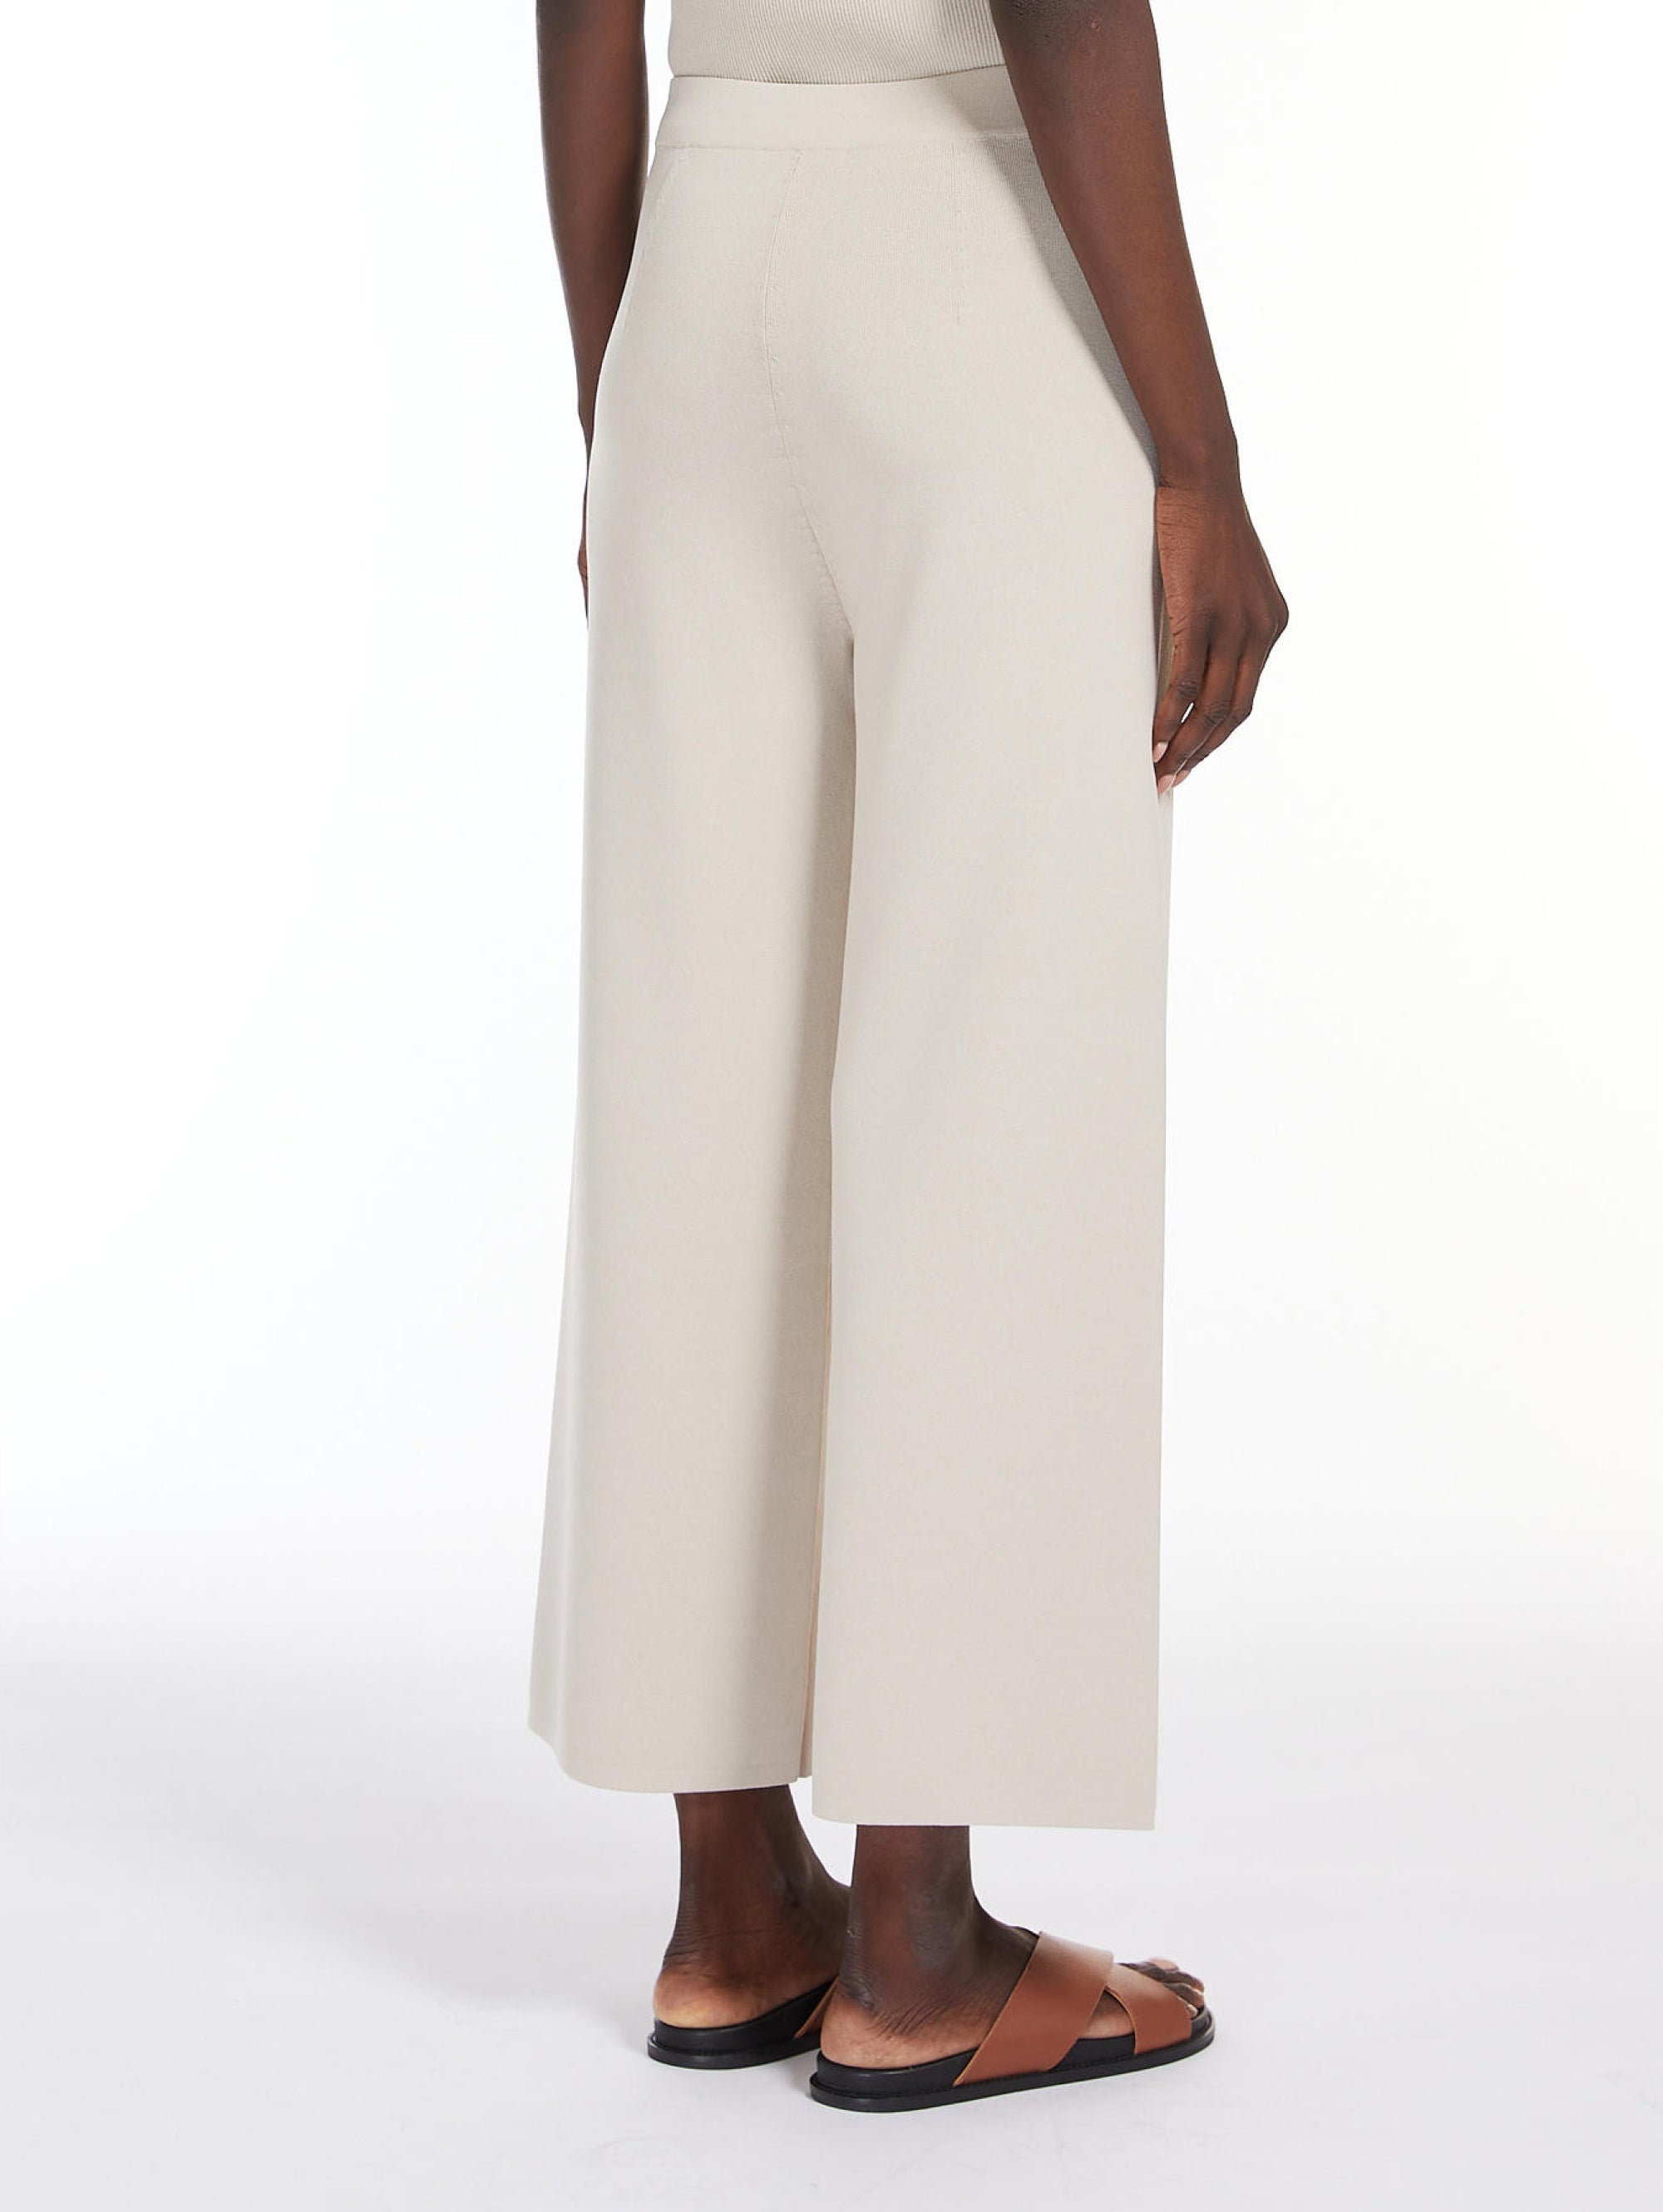 Cropped Trousers in Beige Womb Viscose